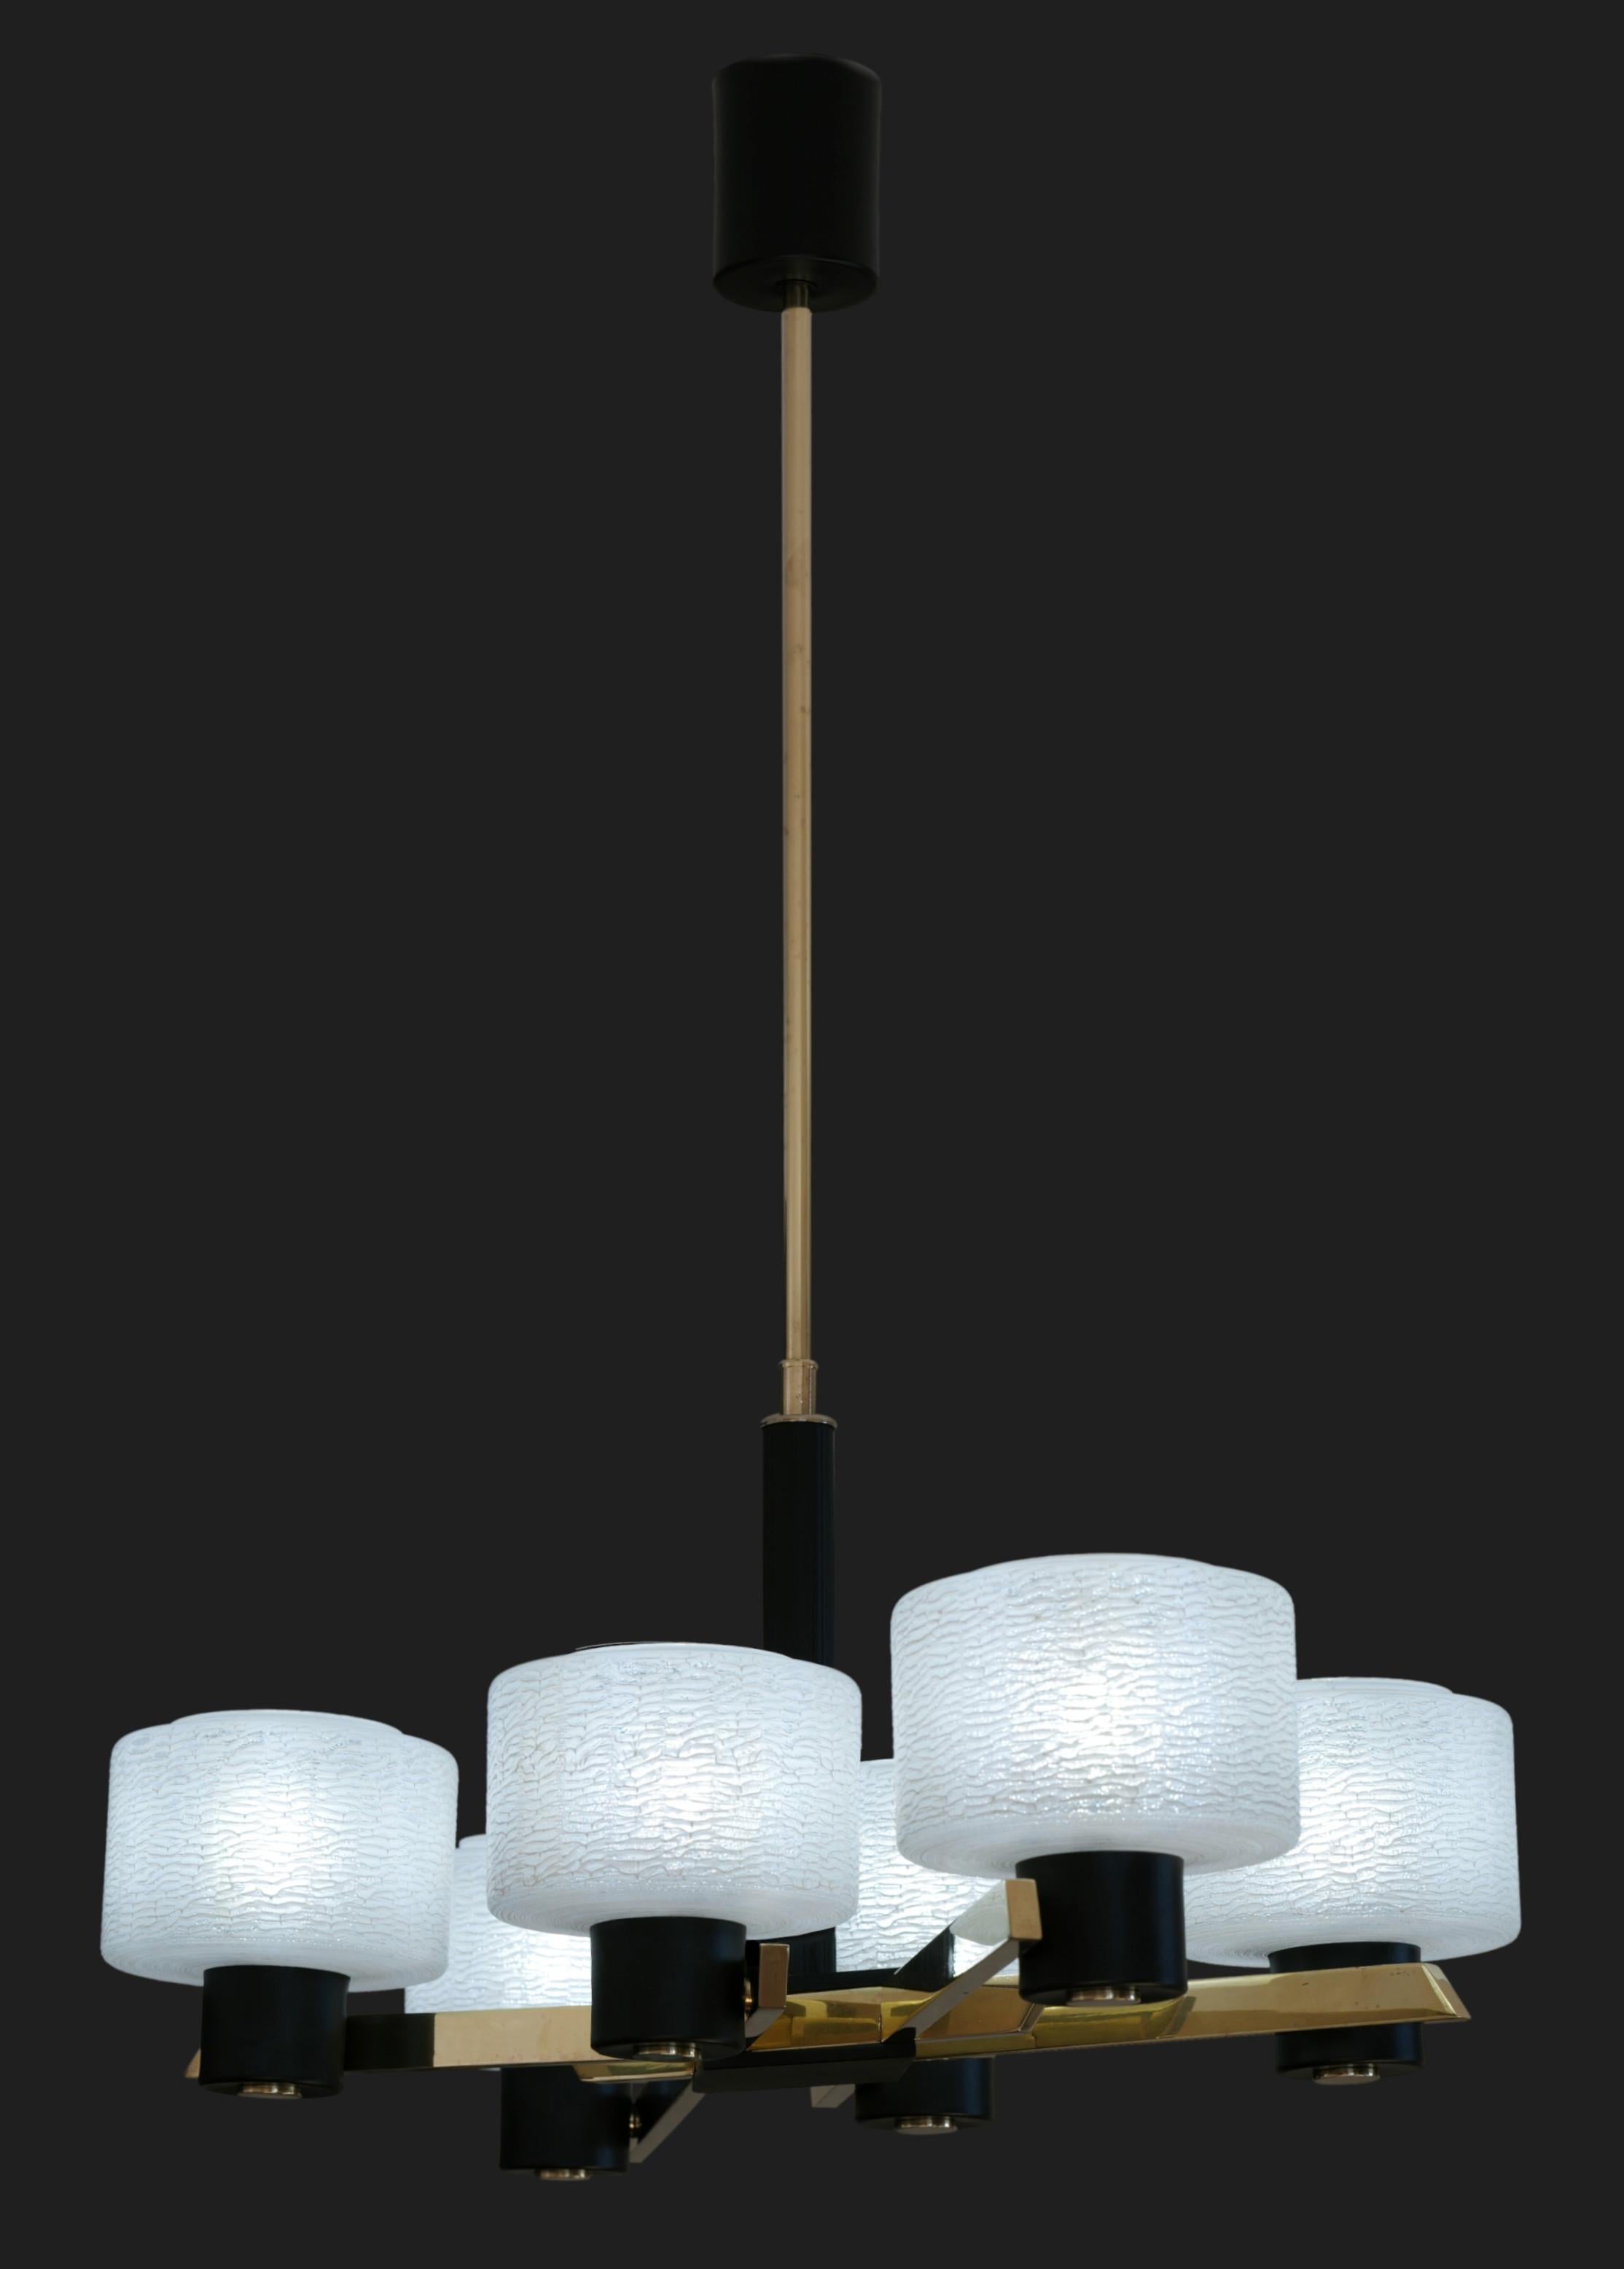 French midcentury chandelier by Maison Arlus (Paris), France, 1950s. 6 white glass shades. Brass and painted black metal. Height: 29.3